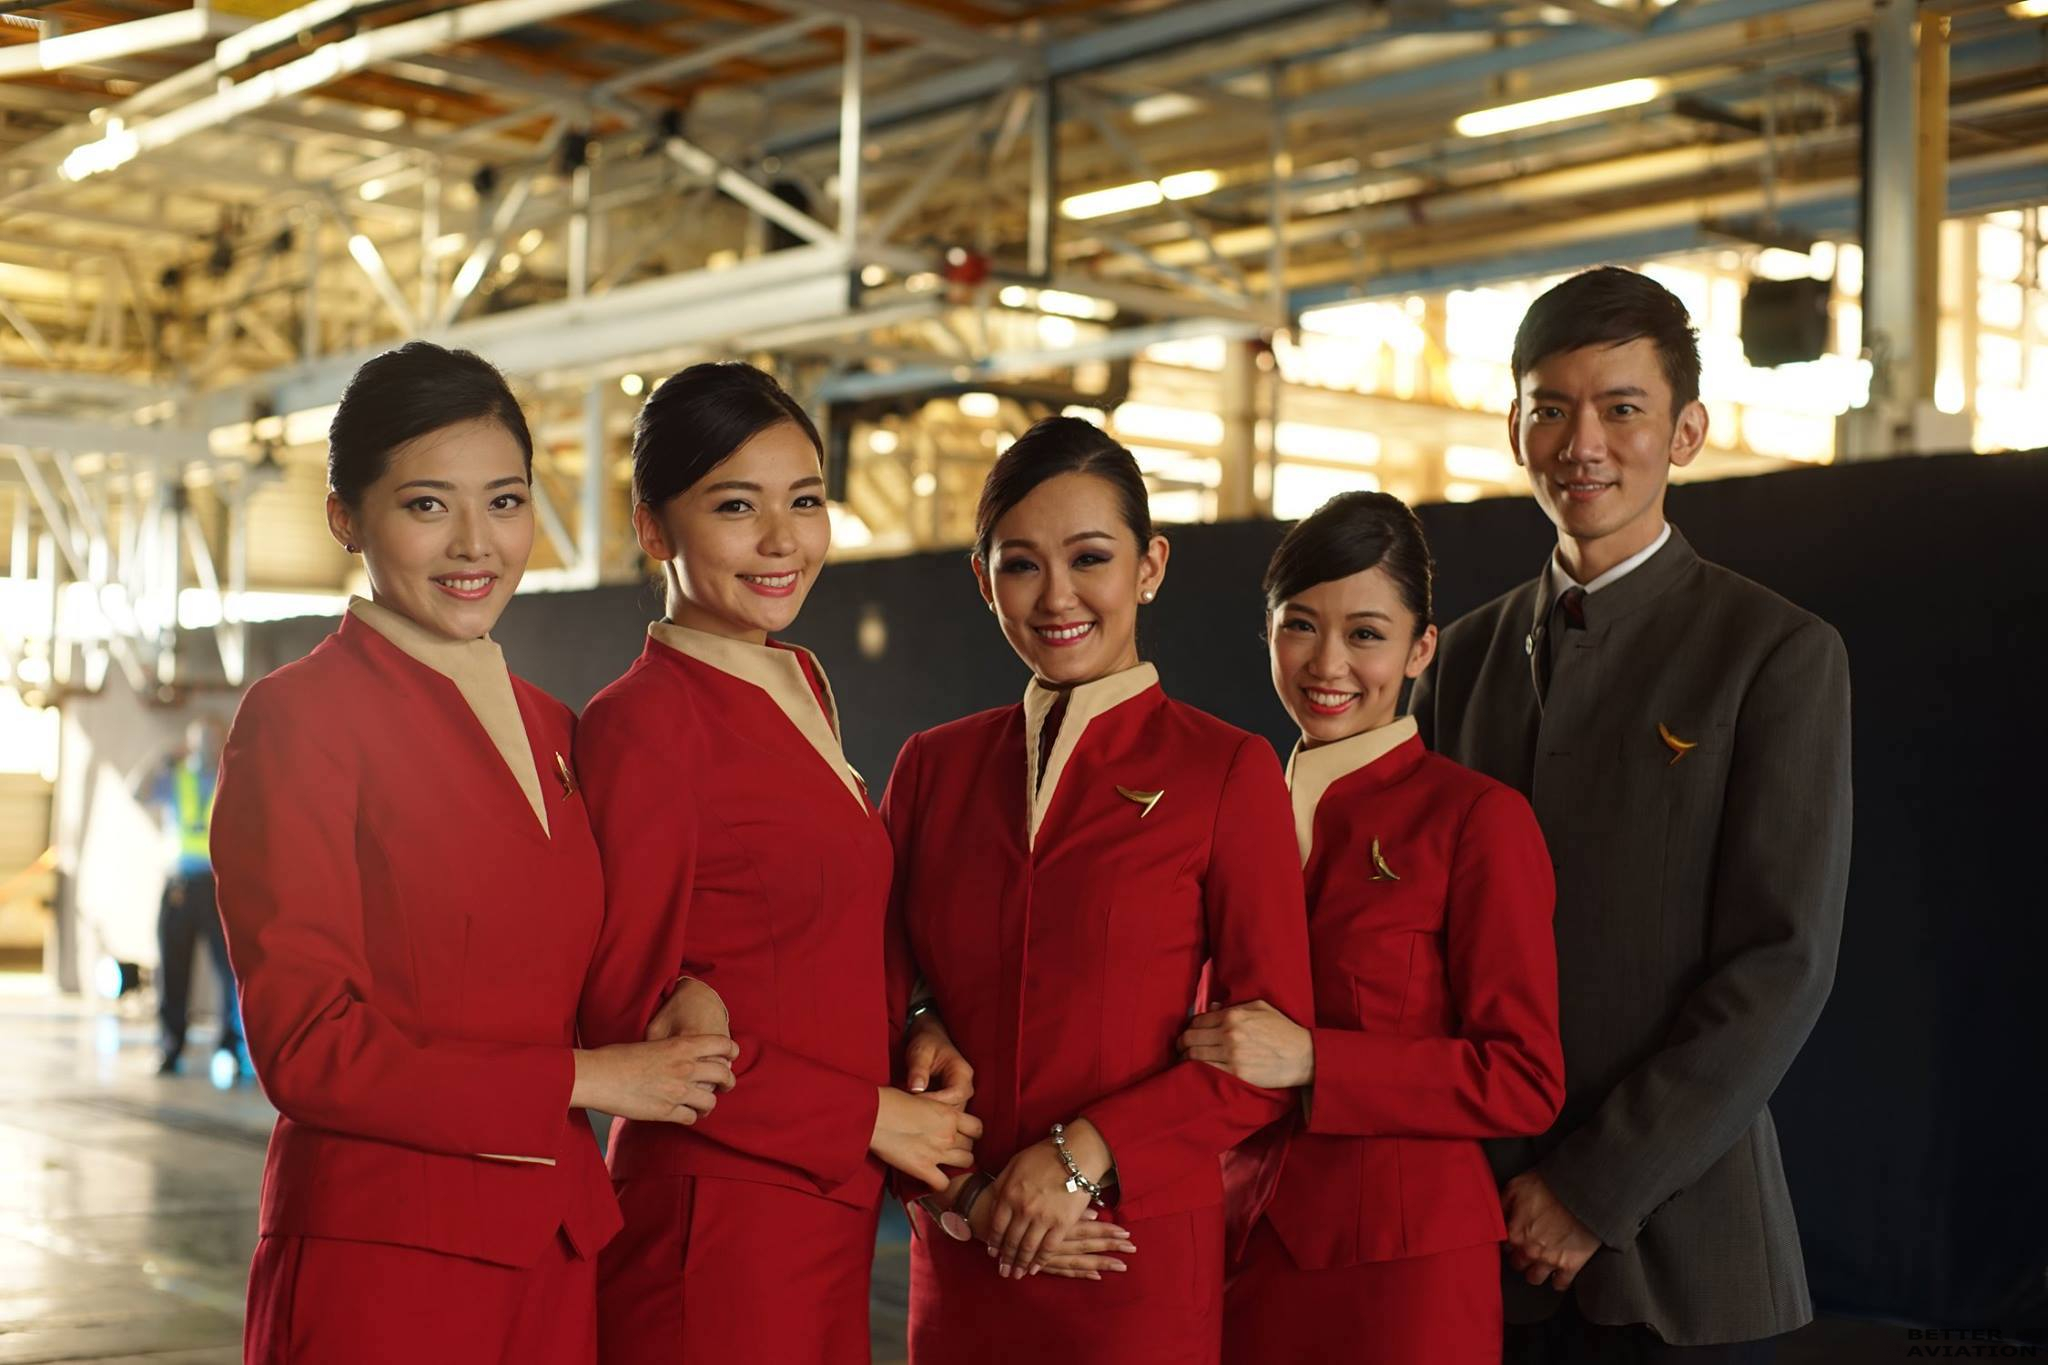 Cathay pacific career